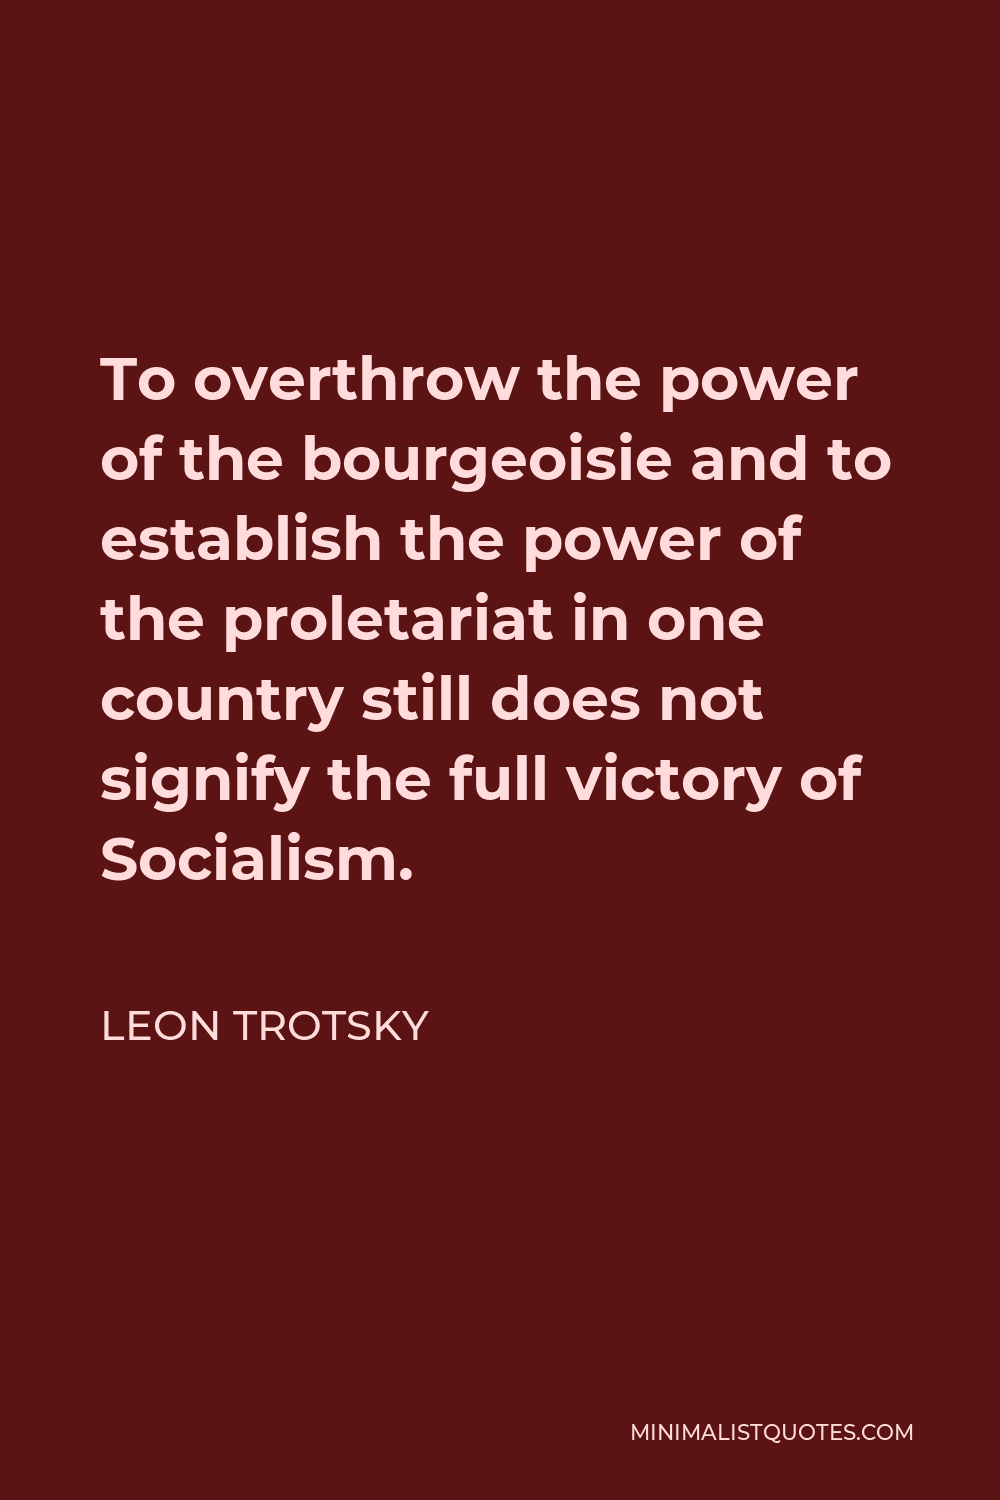 Leon Trotsky Quote - To overthrow the power of the bourgeoisie and to establish the power of the proletariat in one country still does not signify the full victory of Socialism.